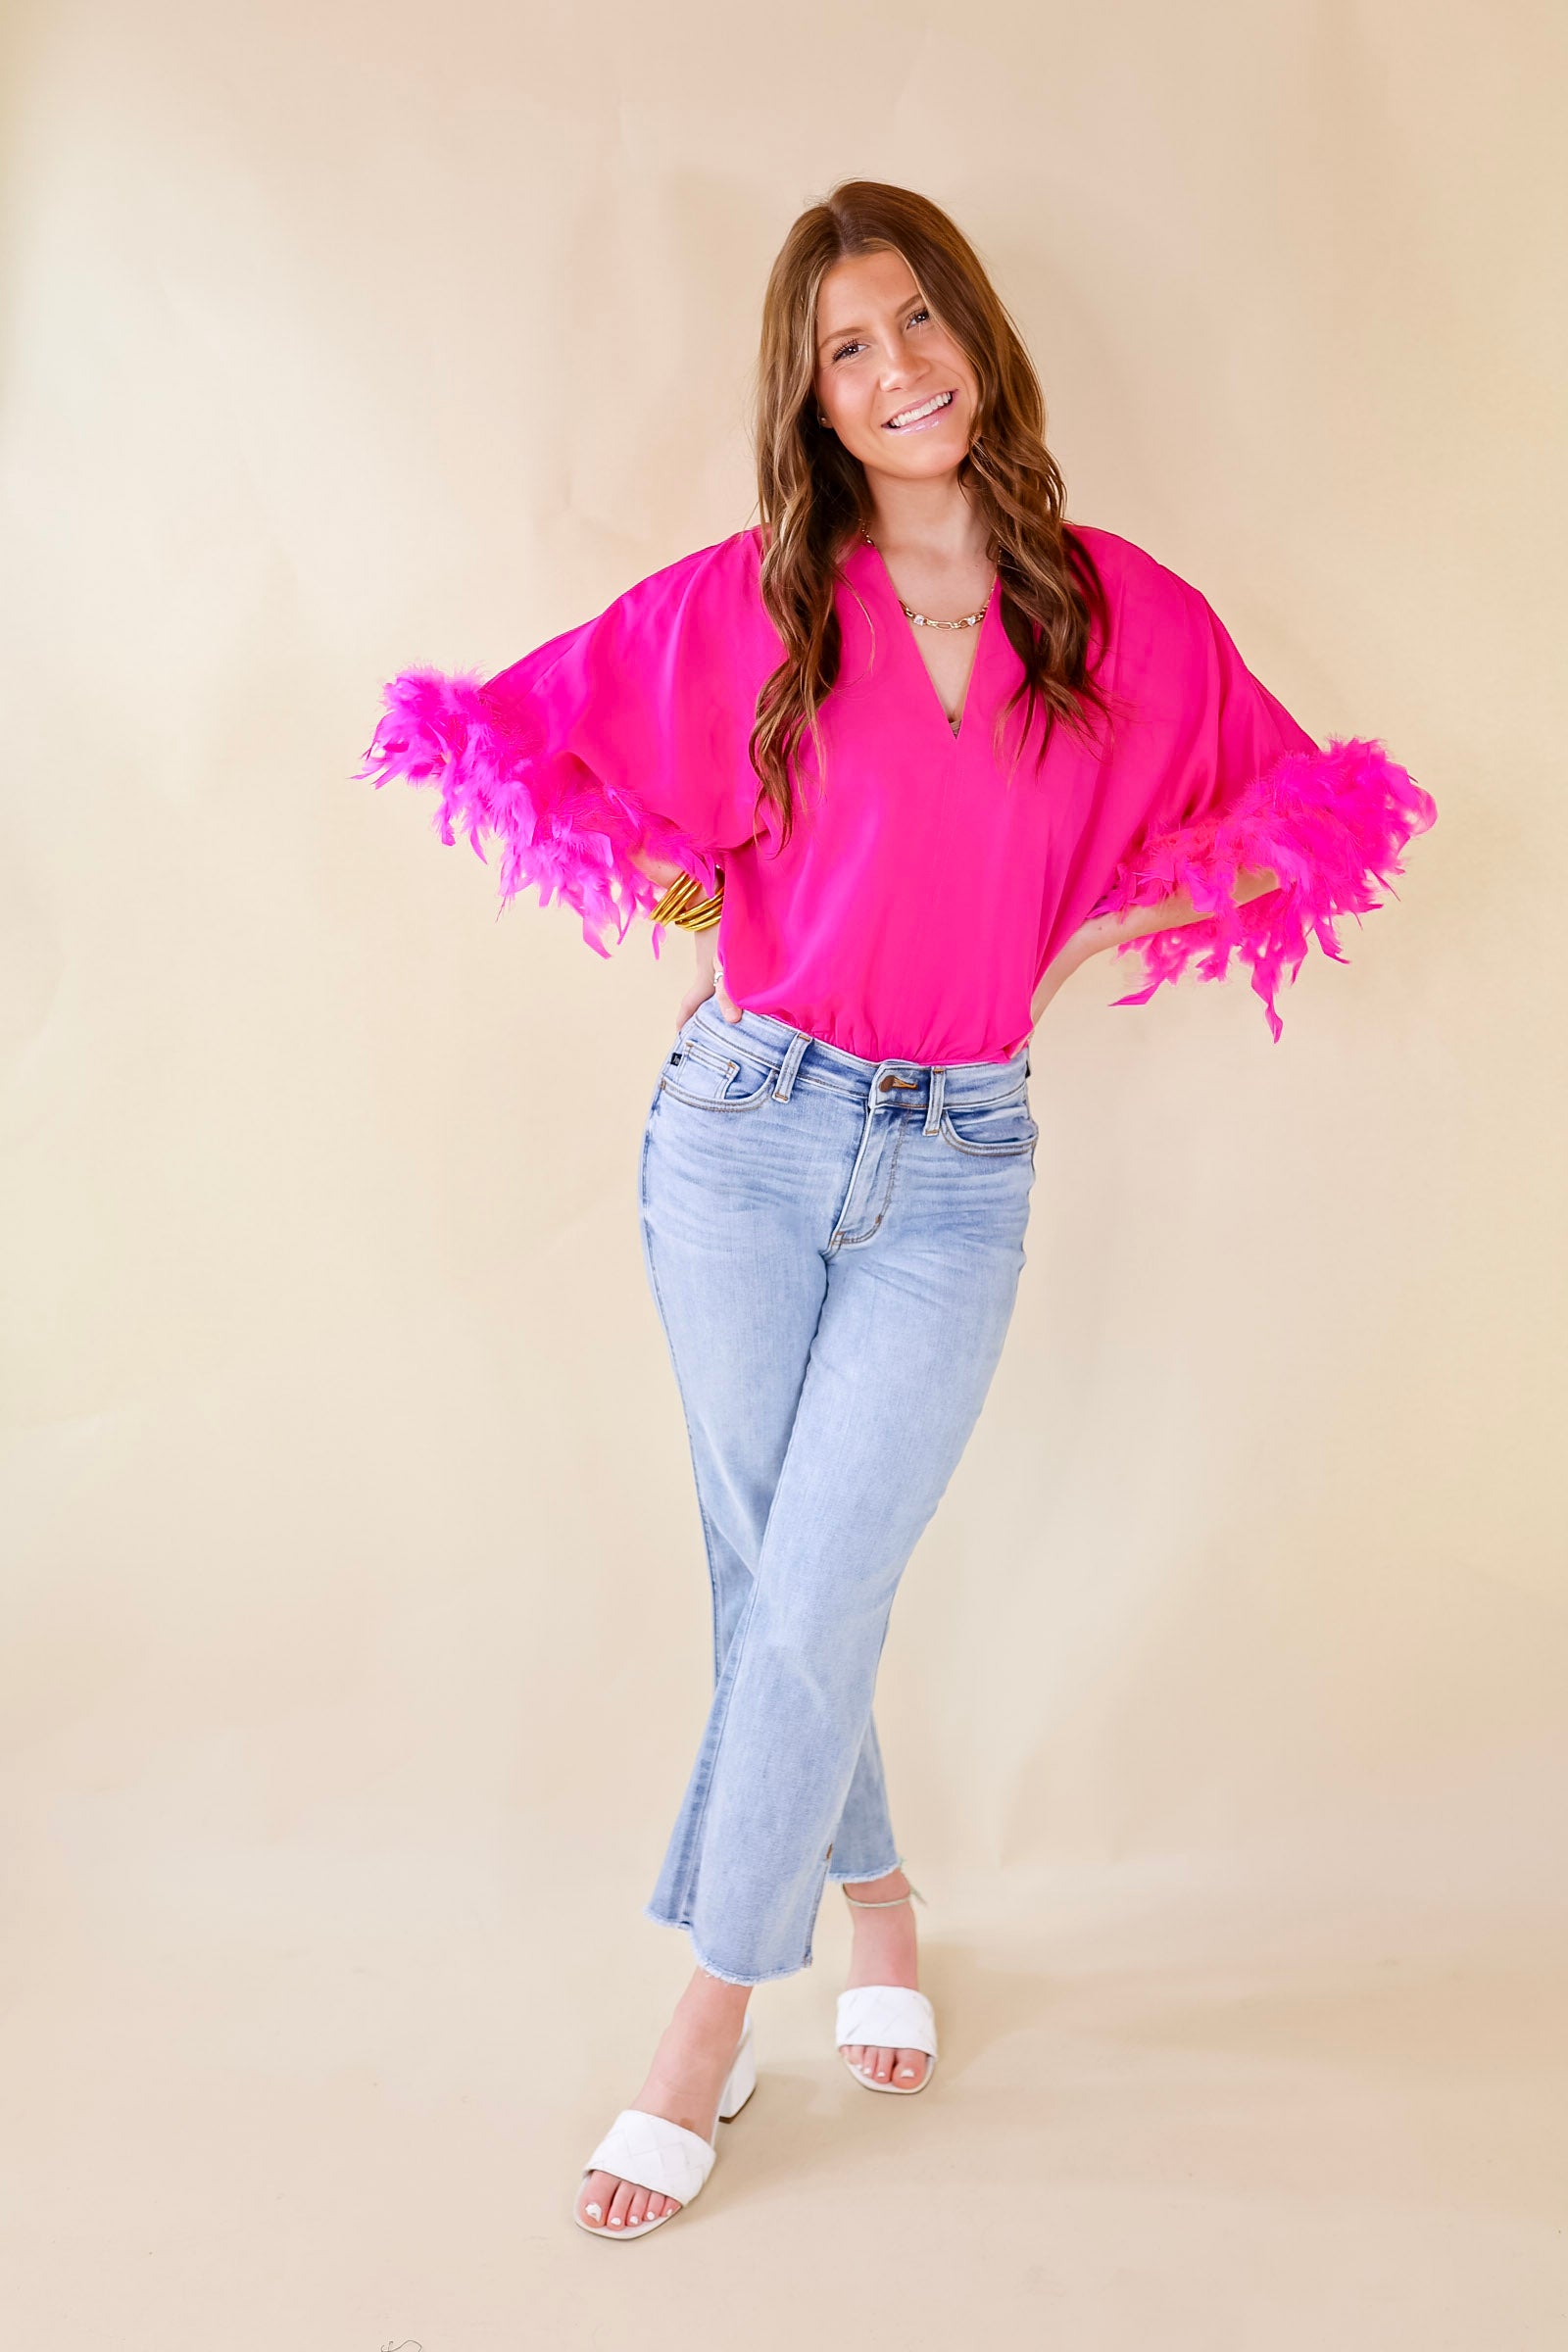 Party Plans V Neck Bodysuit with Feather Sleeves in Fuchsia Pink - Giddy Up Glamour Boutique